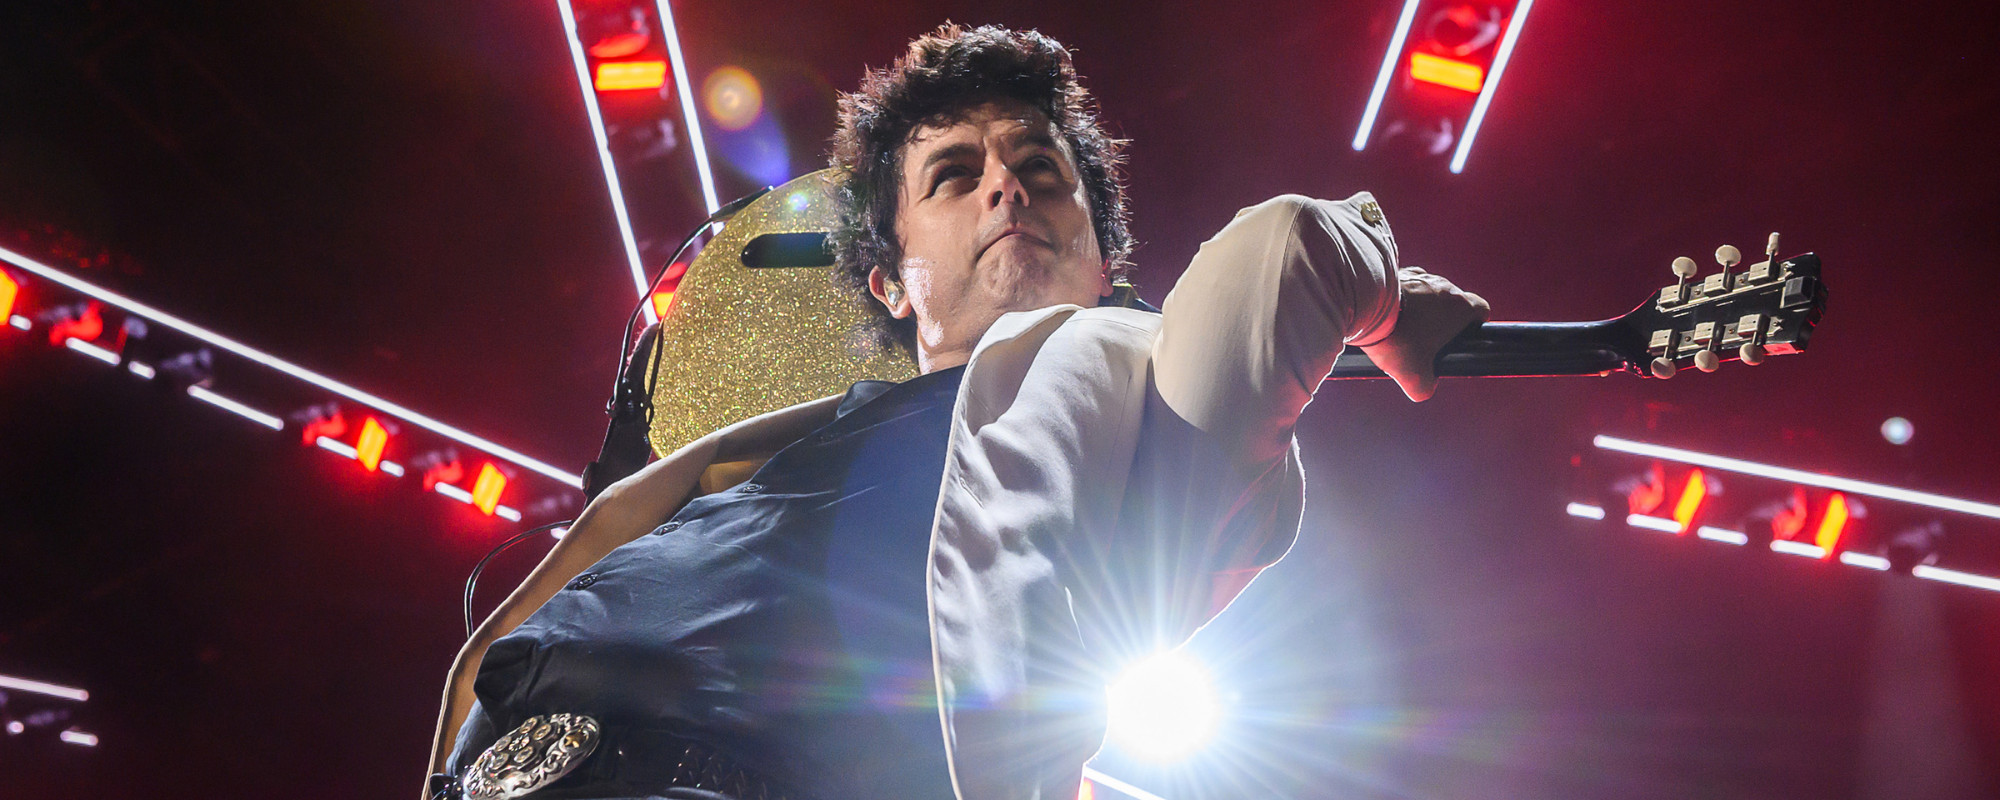 4 Memorable Stage Rants From Green Day’s Billie Joe Armstrong